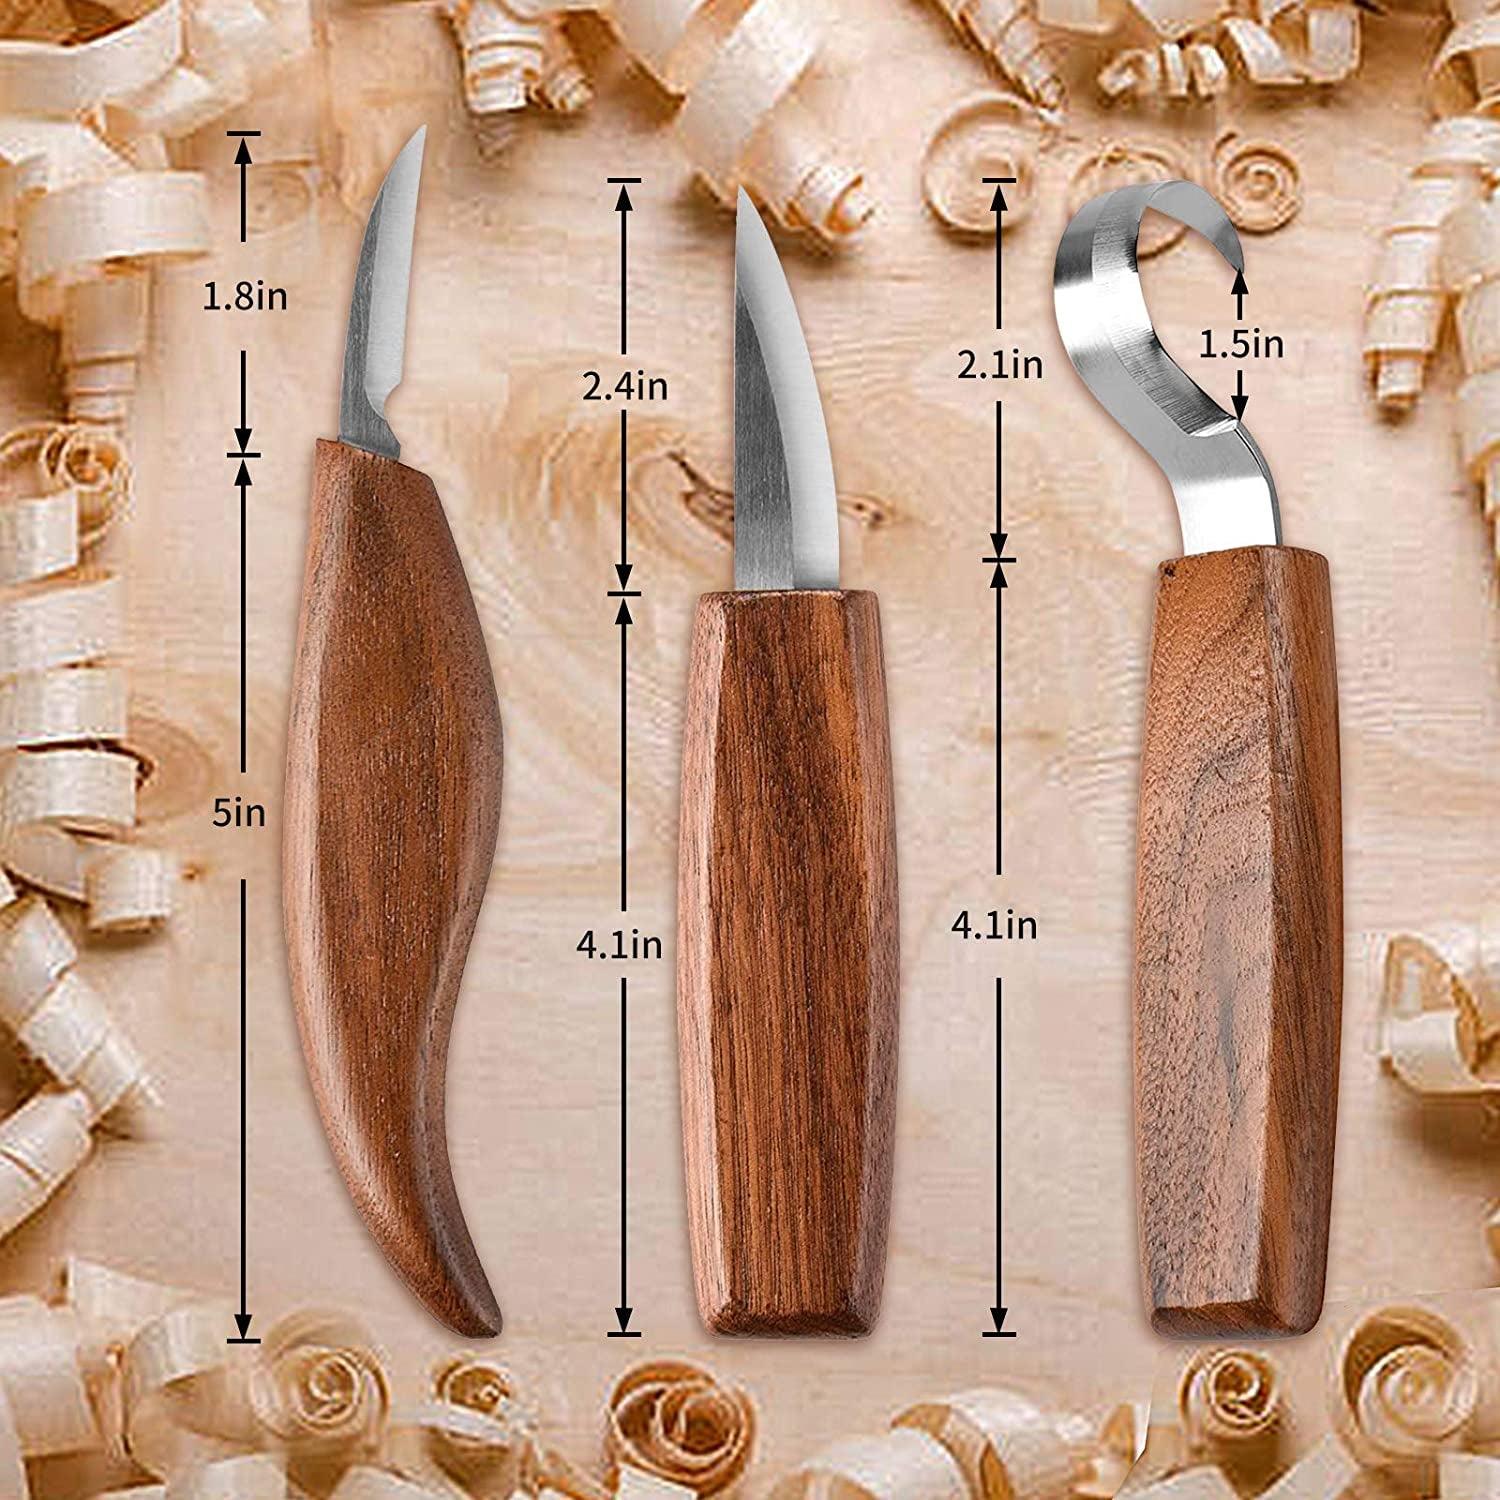 7 in 1 Wood Carving Tools Kit with Carving Hook Knife Wood